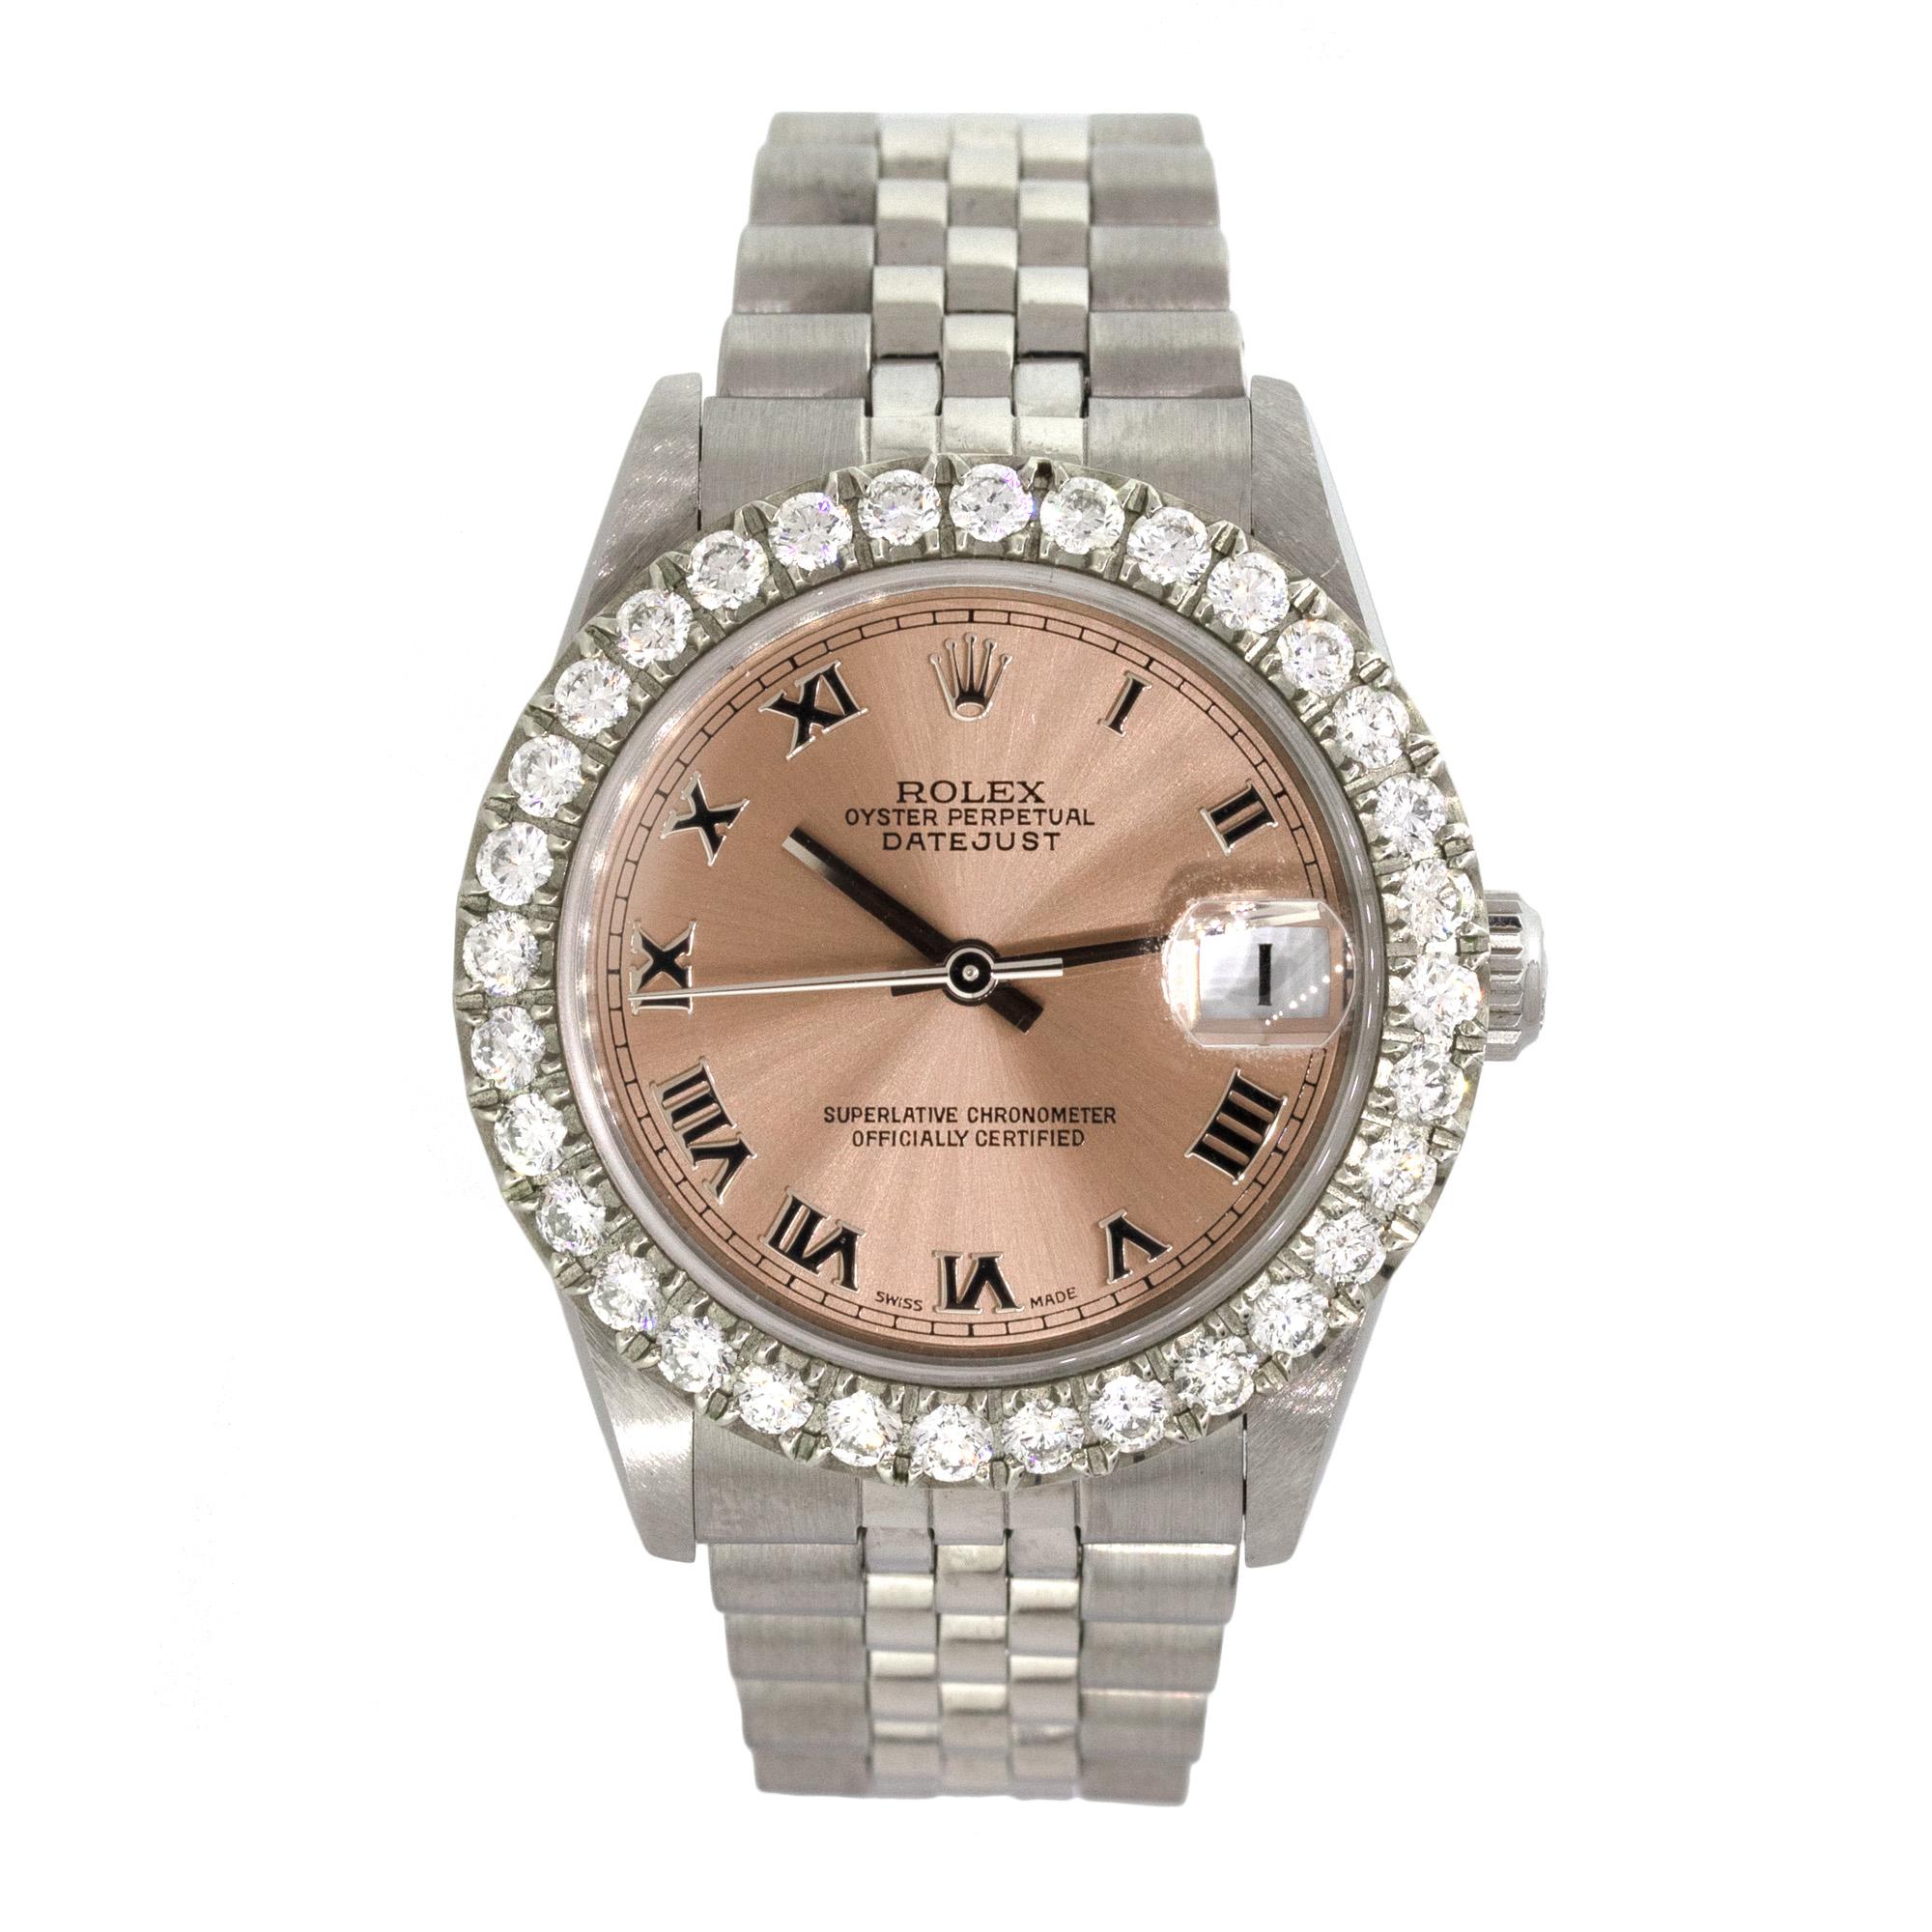 Brand: Rolex
MPN: 78274
Model: Datejust
Case Material: Stainless Steel
Case Diameter: 31mm
Crystal: Sapphire crystal
Bezel: Aftermarket Diamond bezel
Dial: Salmon dial with Roman Numerals
Bracelet: Stainless steel Jubilee band
Size: Will fit a 5.5